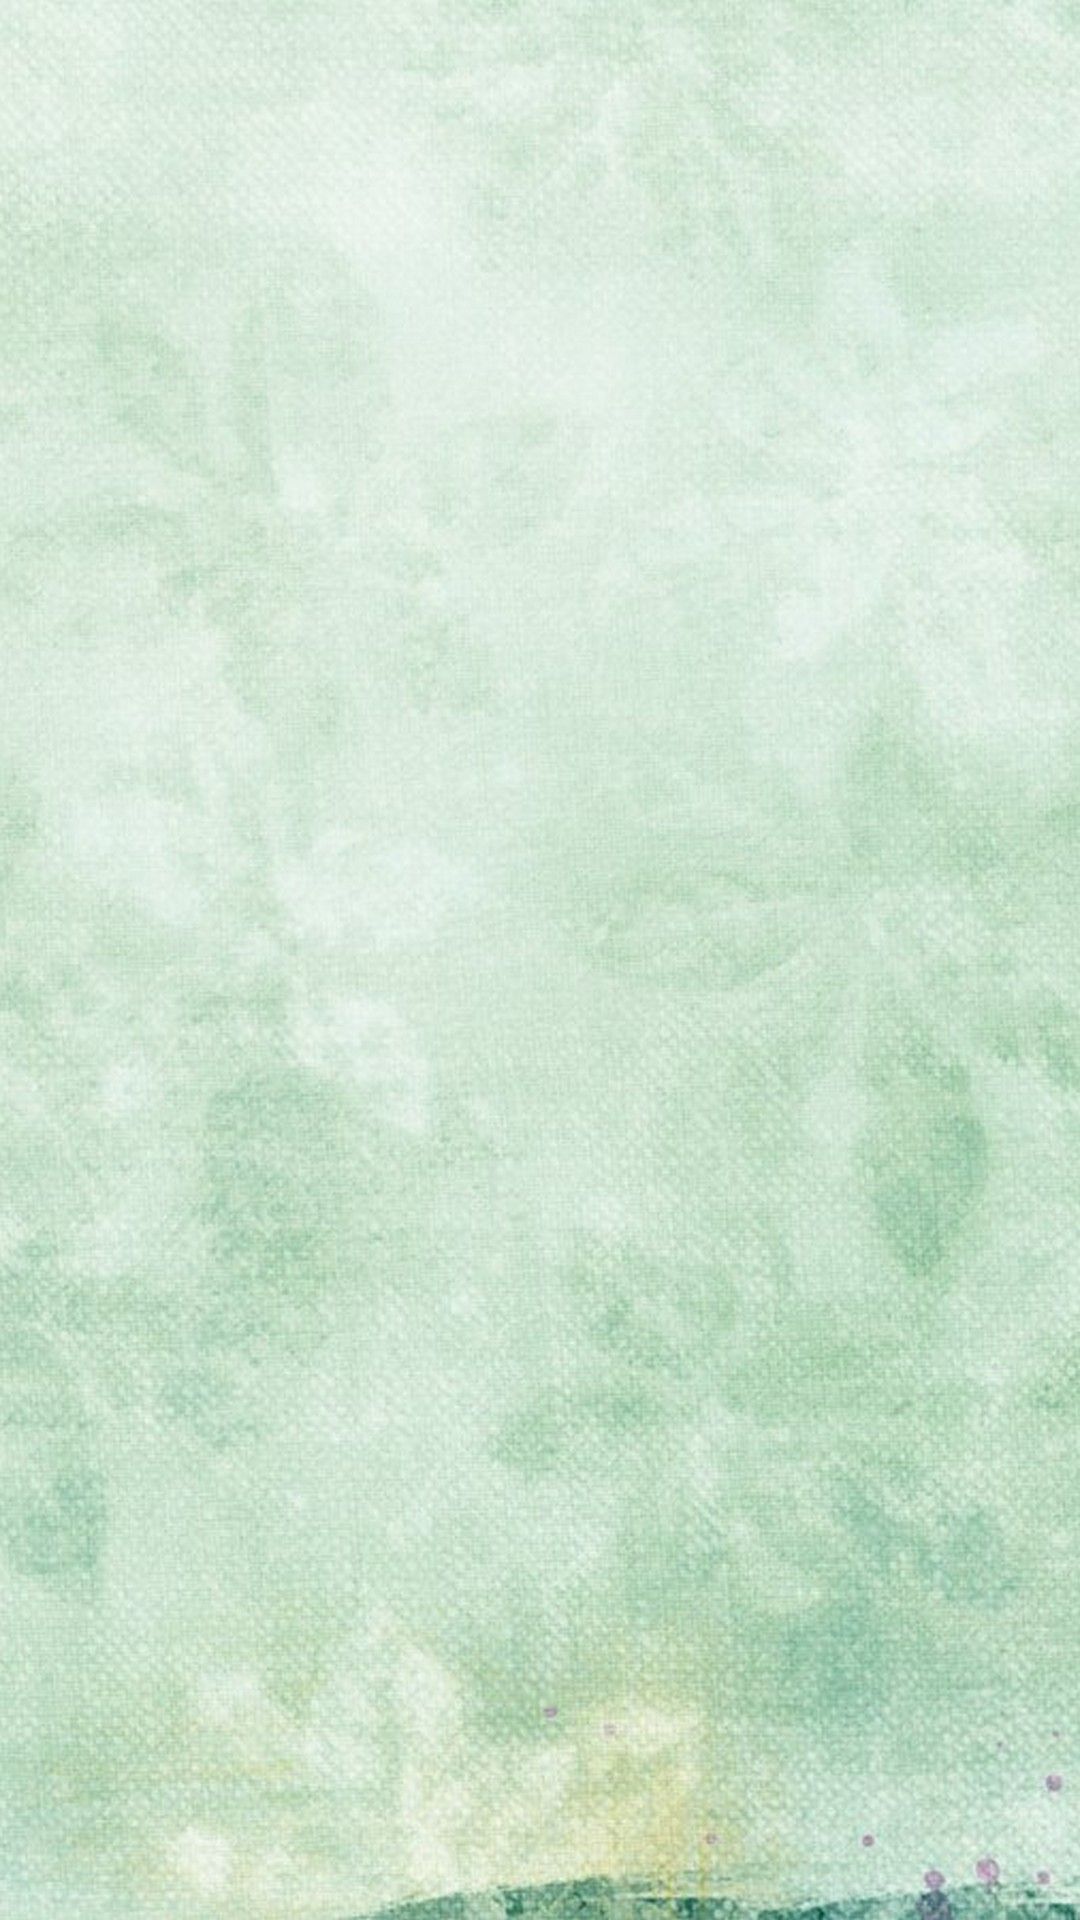 Green And Gold Phone Wallpaper. Mint green wallpaper iphone, Mint green background, Mint green wallpaper